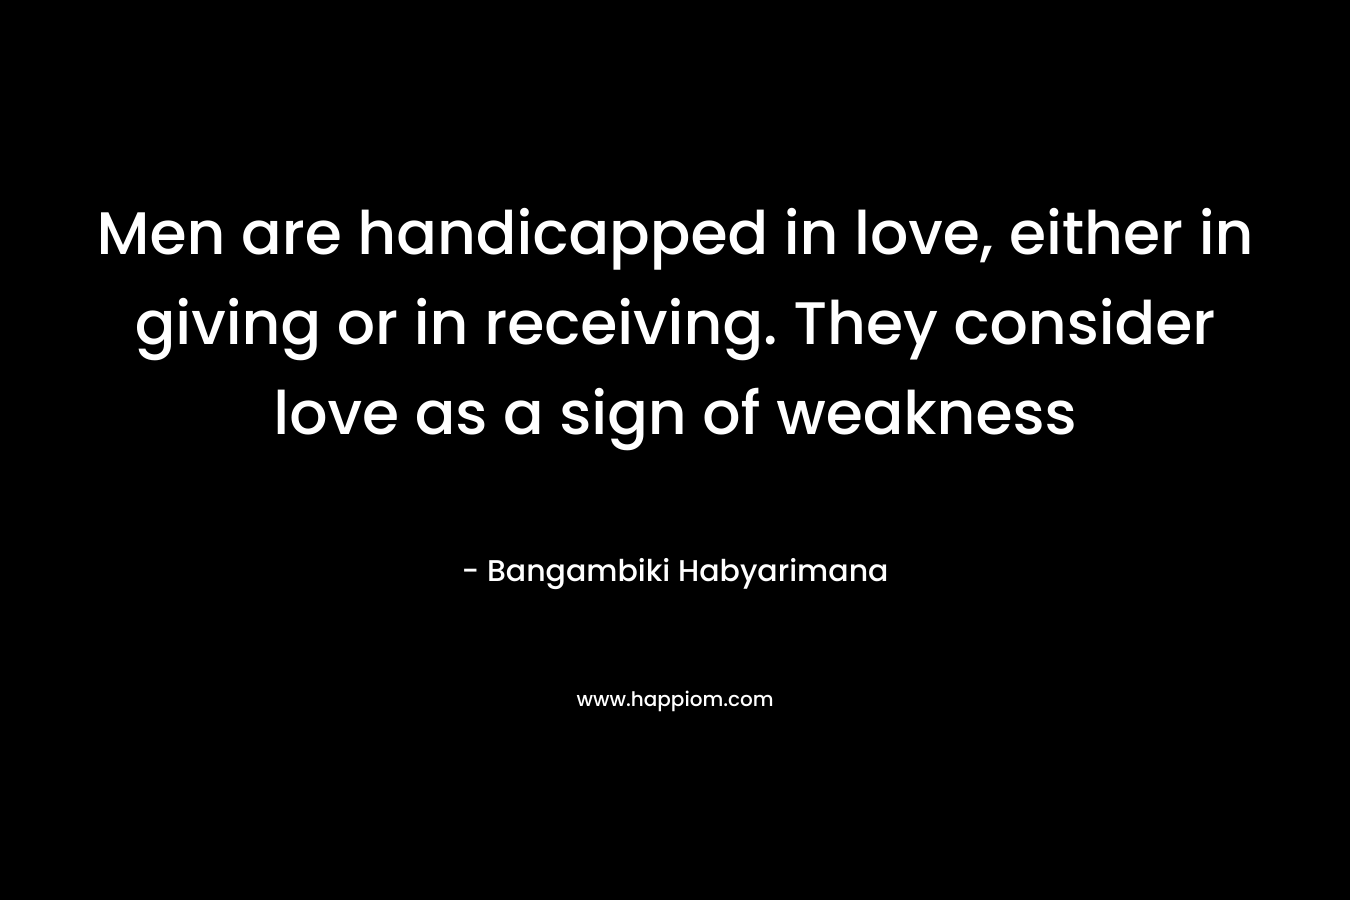 Men are handicapped in love, either in giving or in receiving. They consider love as a sign of weakness